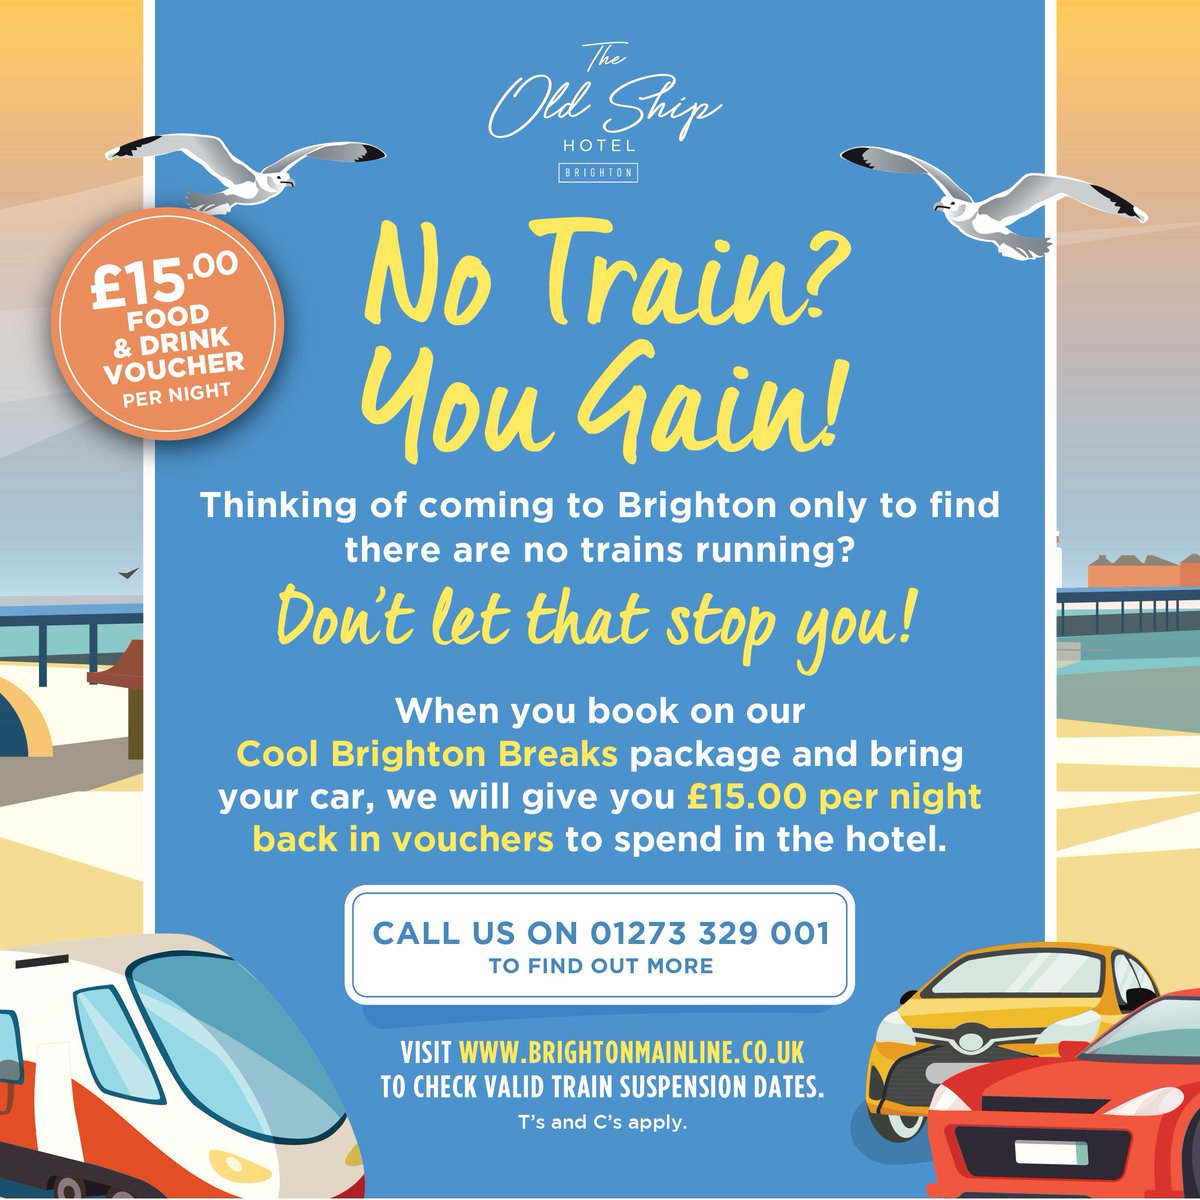 Up until May some London to Brighton trains will have replacement buses from Three Bridges. Don't despair! #brightonisopen Why not take advantage of our #notrainyougain offer and enjoy yourself just as you planned! Call 01273 329001 for details @cairngroup @Love_Brighton